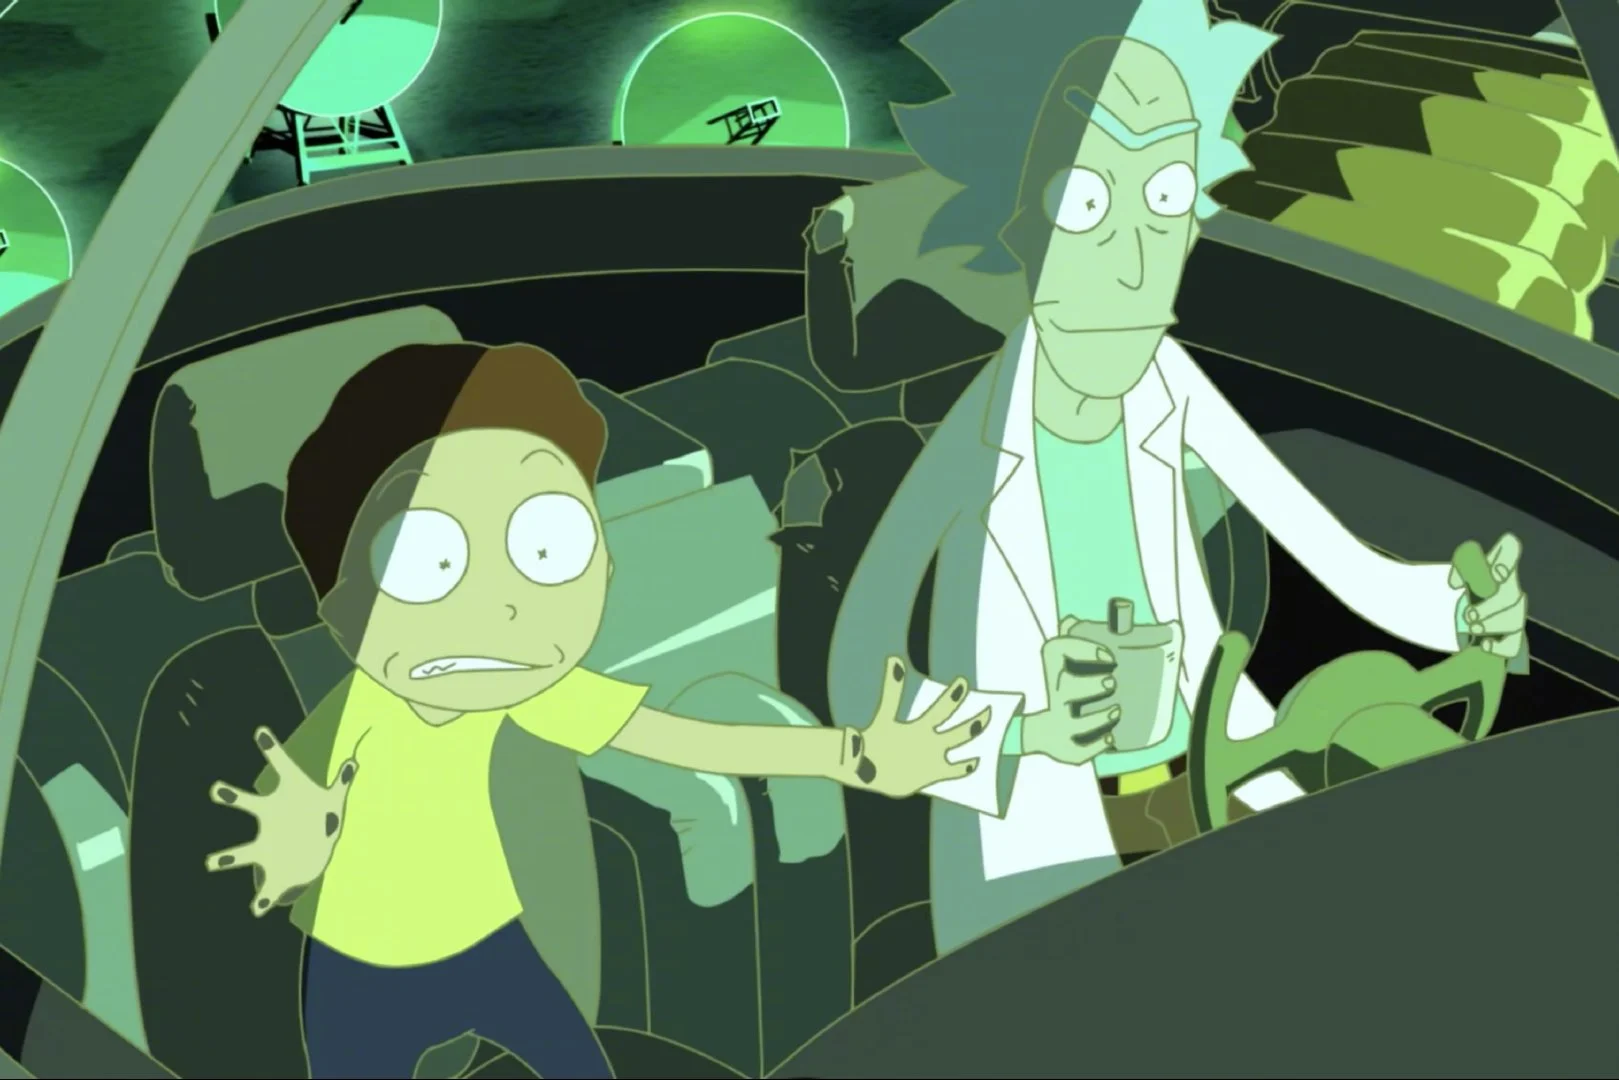 Adult Swim Announces 'Rick and Morty' Will Launch a Spin-Off, Japanese Anime Style 'Rick and Morty: The Anime'